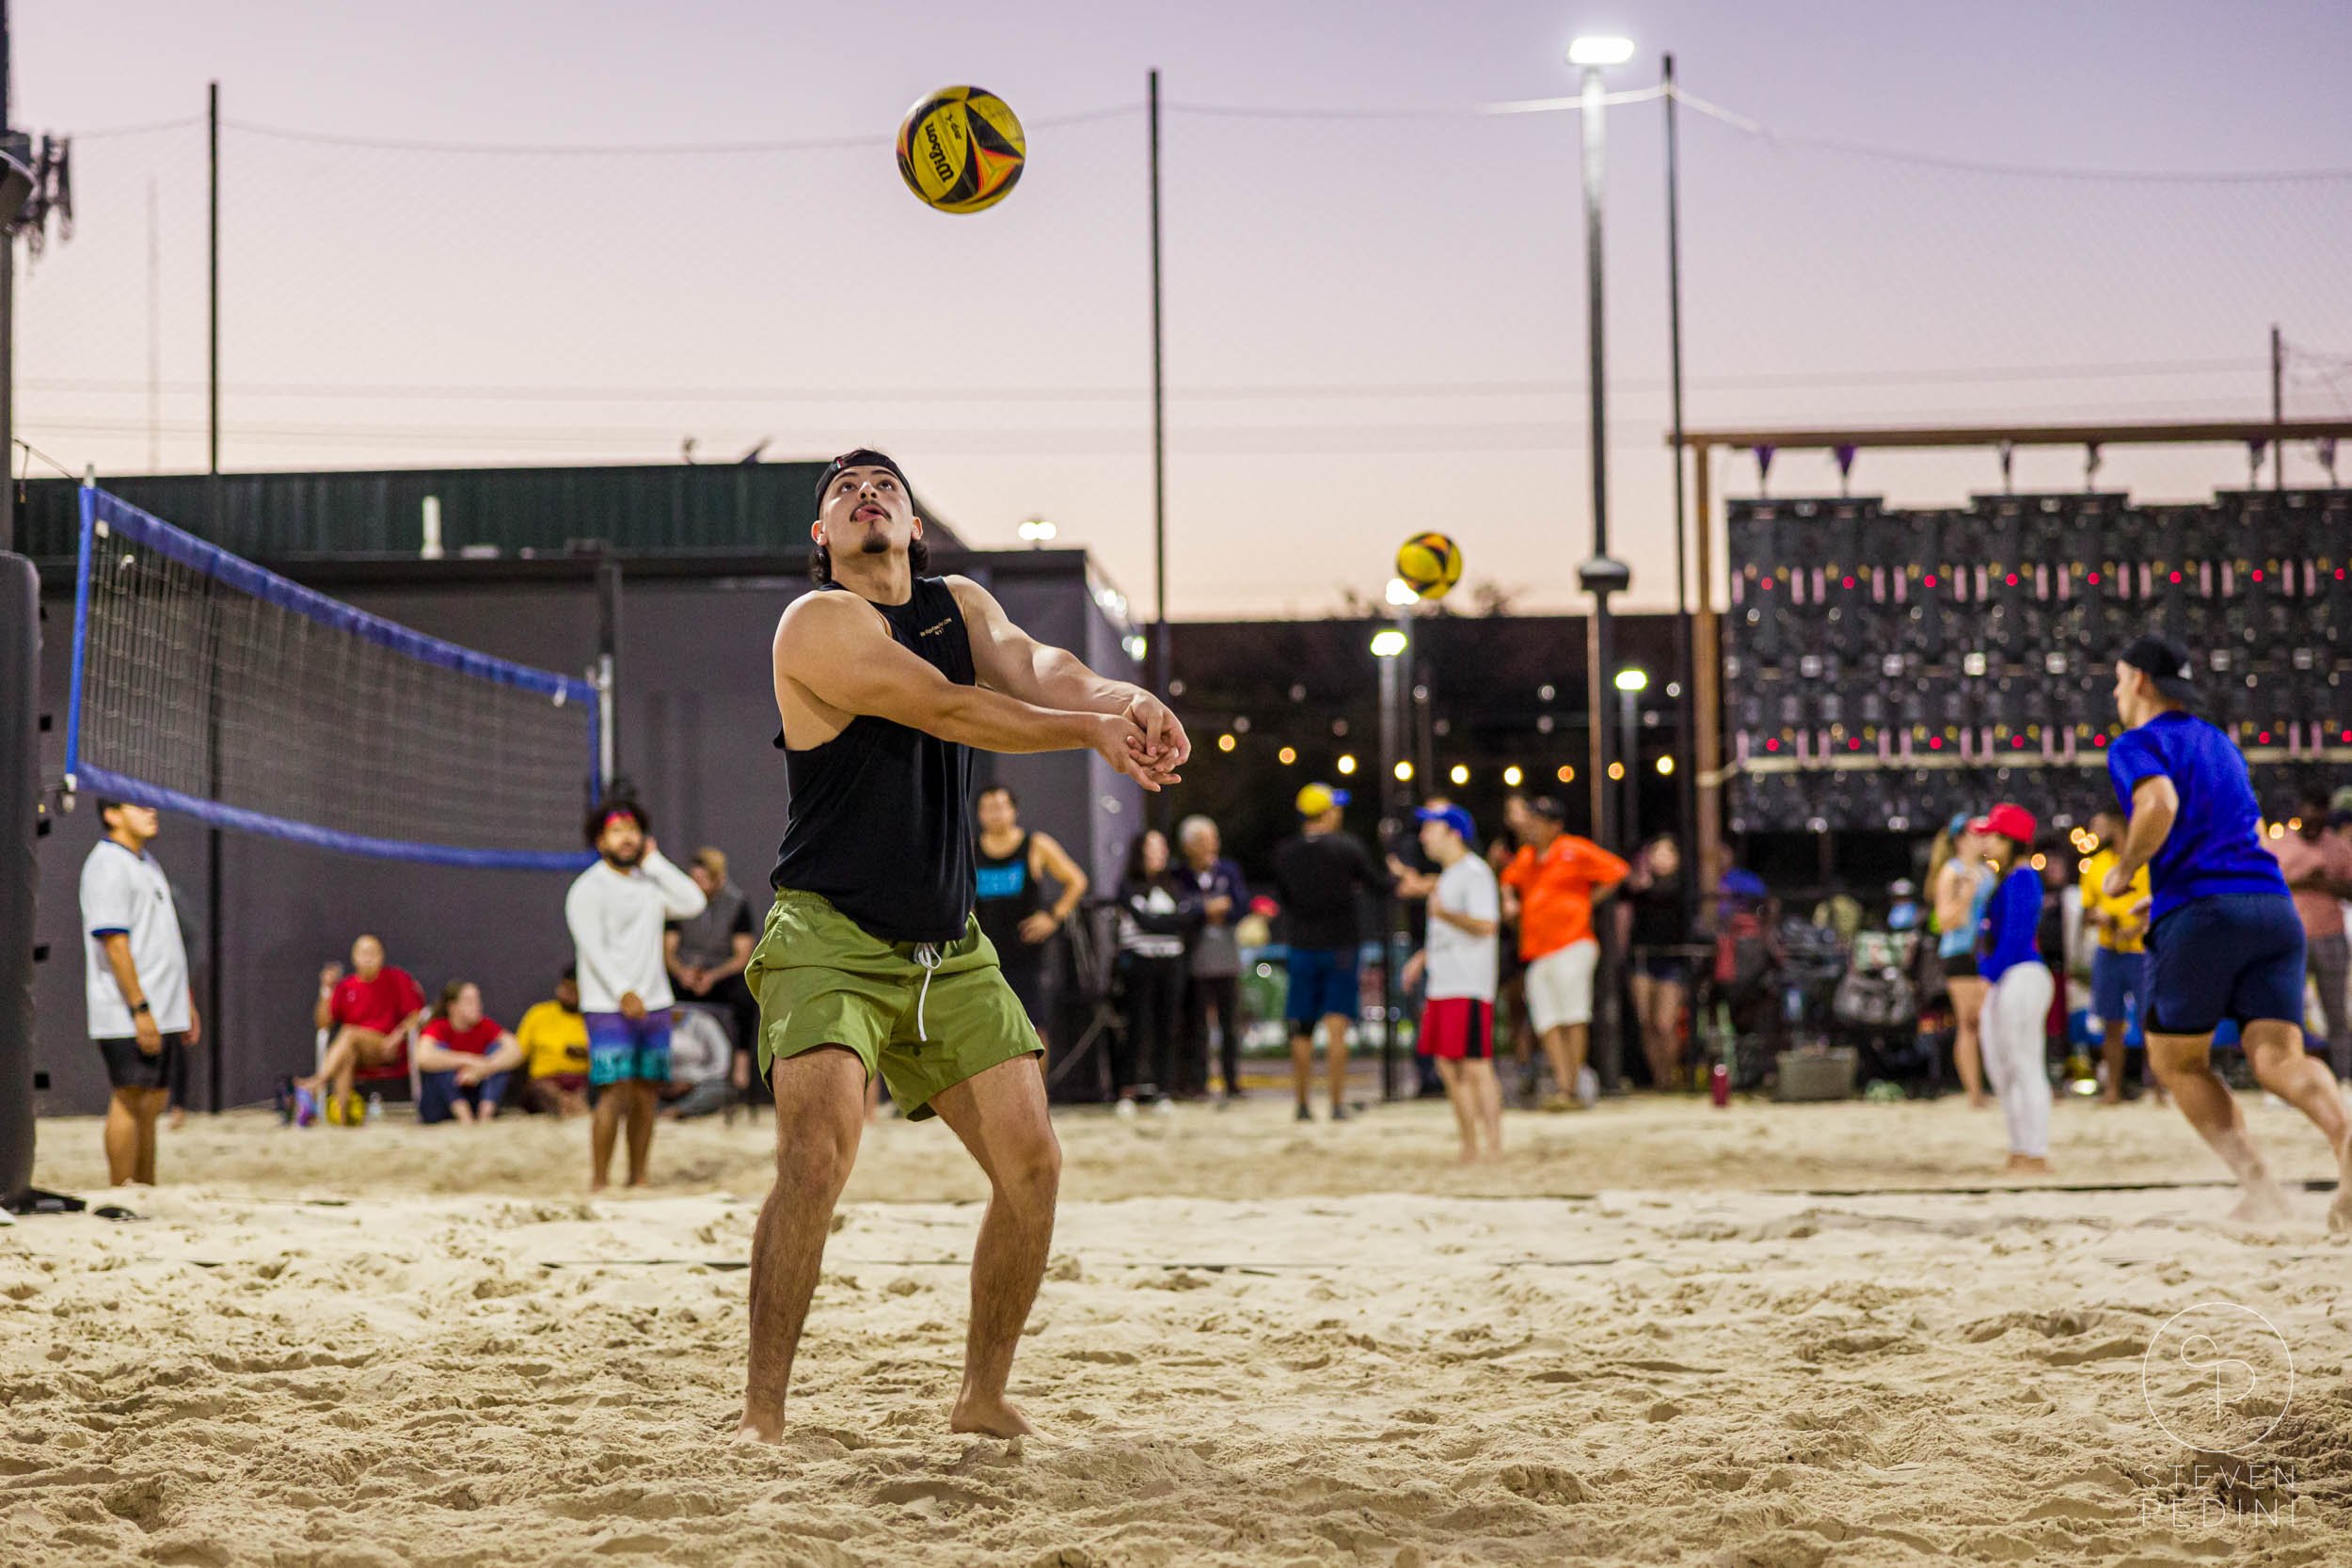 Steven Pedini Photography - Bumpy Pickle - Sand Volleyball - Houston TX - World Cup of Volleyball - 00304.jpg